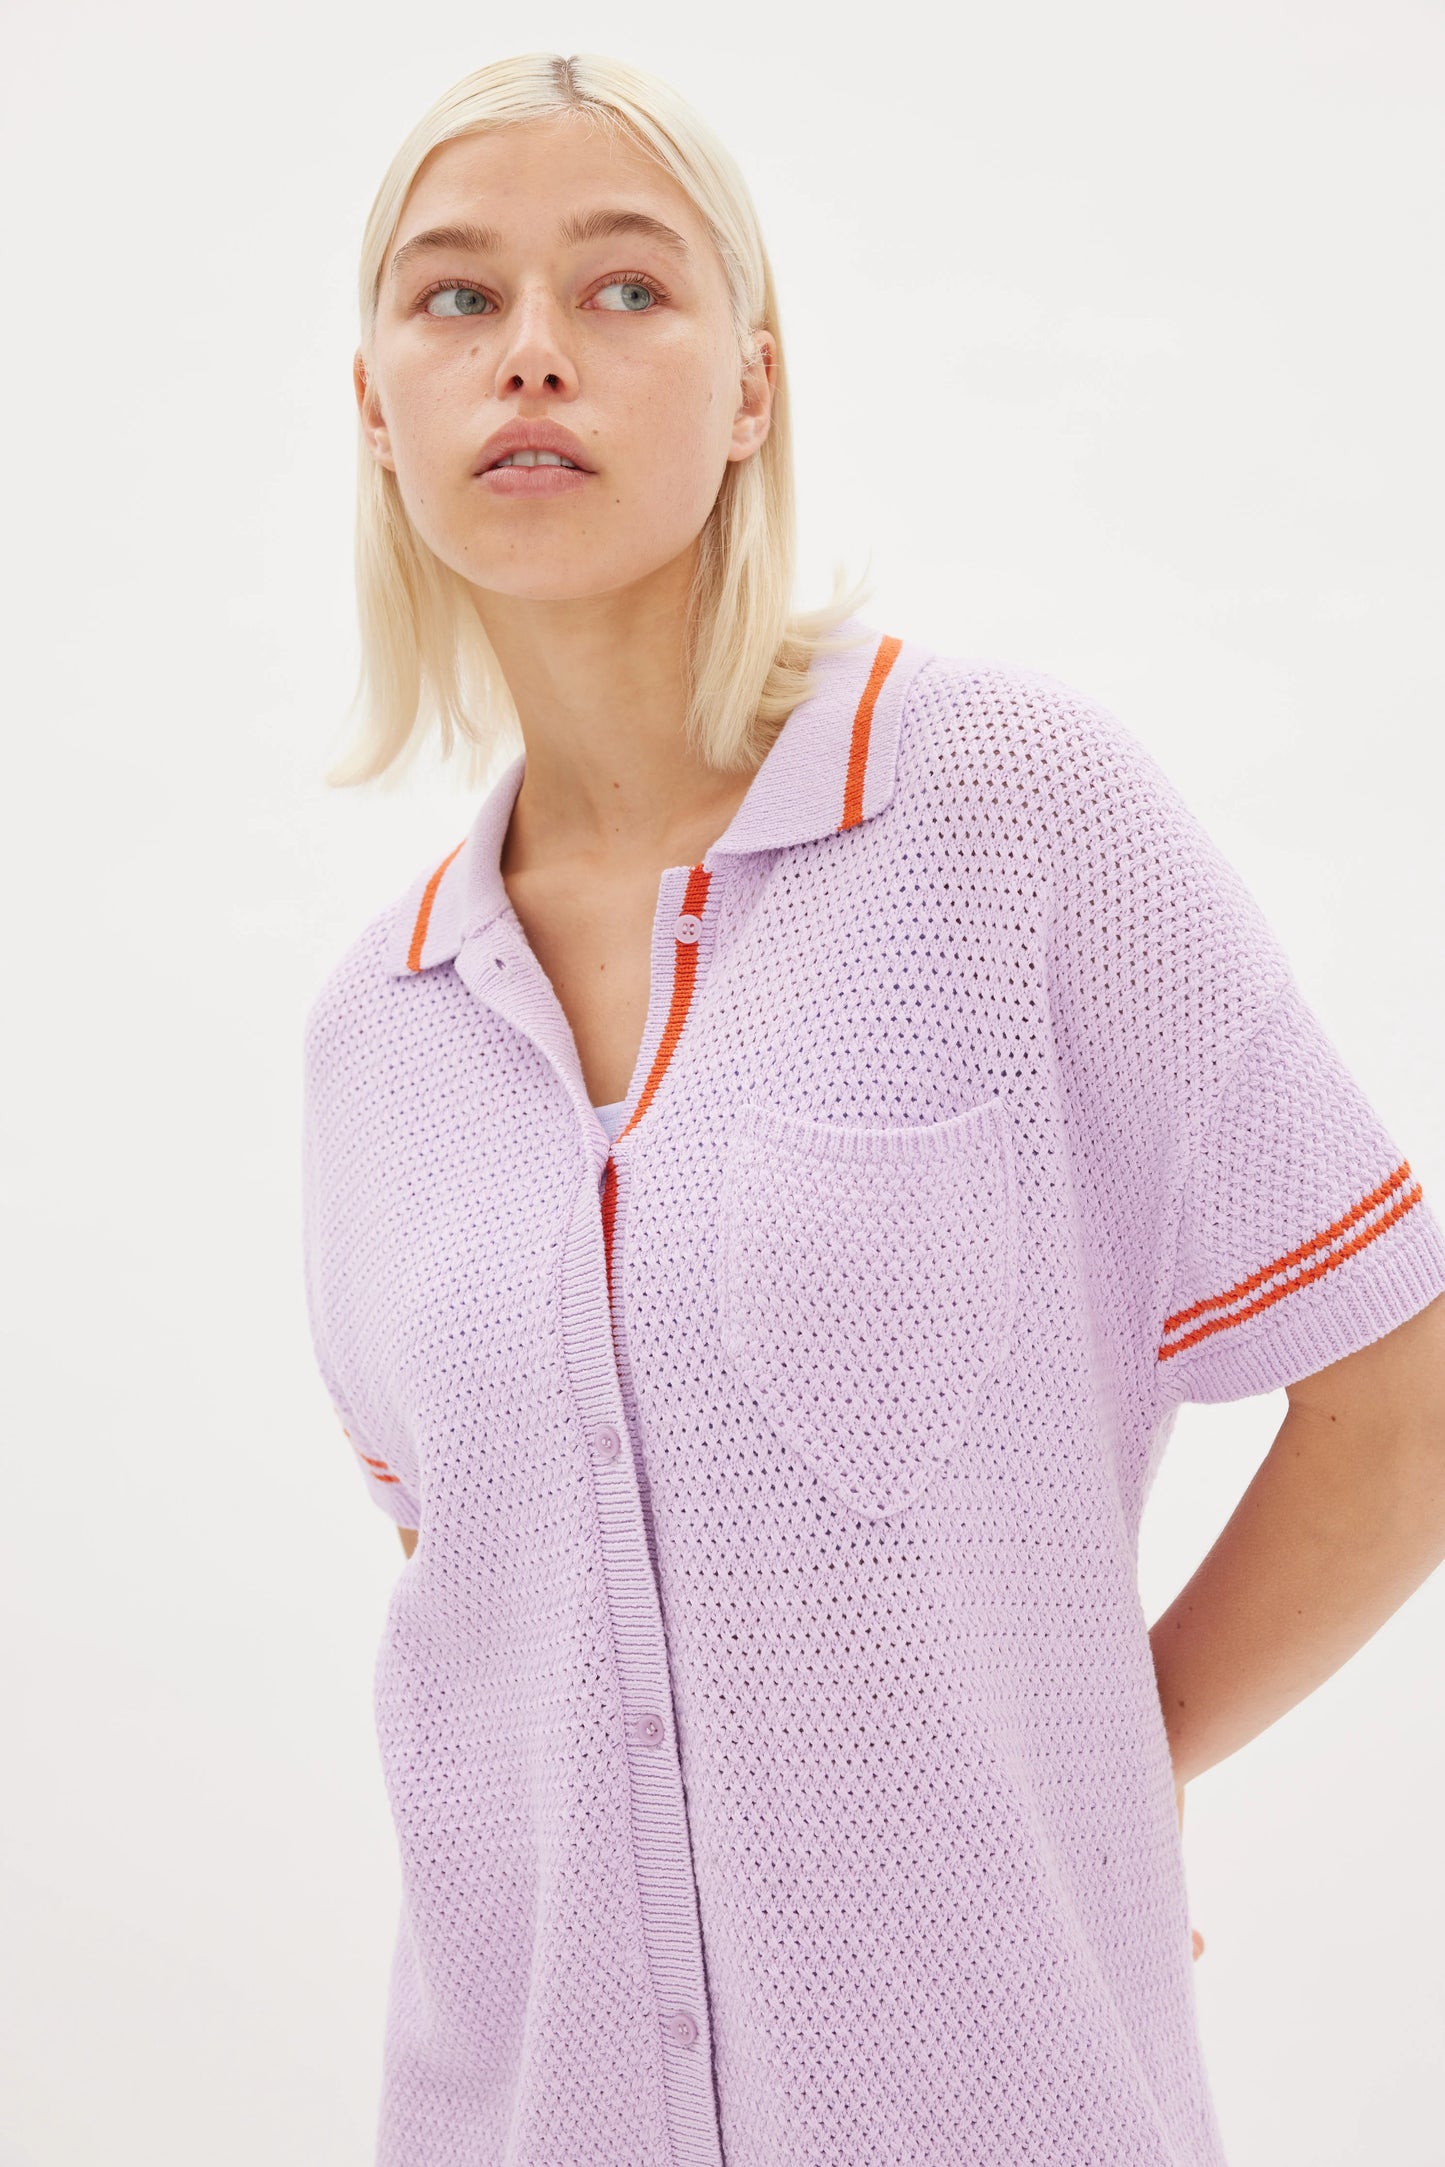 Soller Short Sleeve Knit Shirt in Neon Lilac and Coral